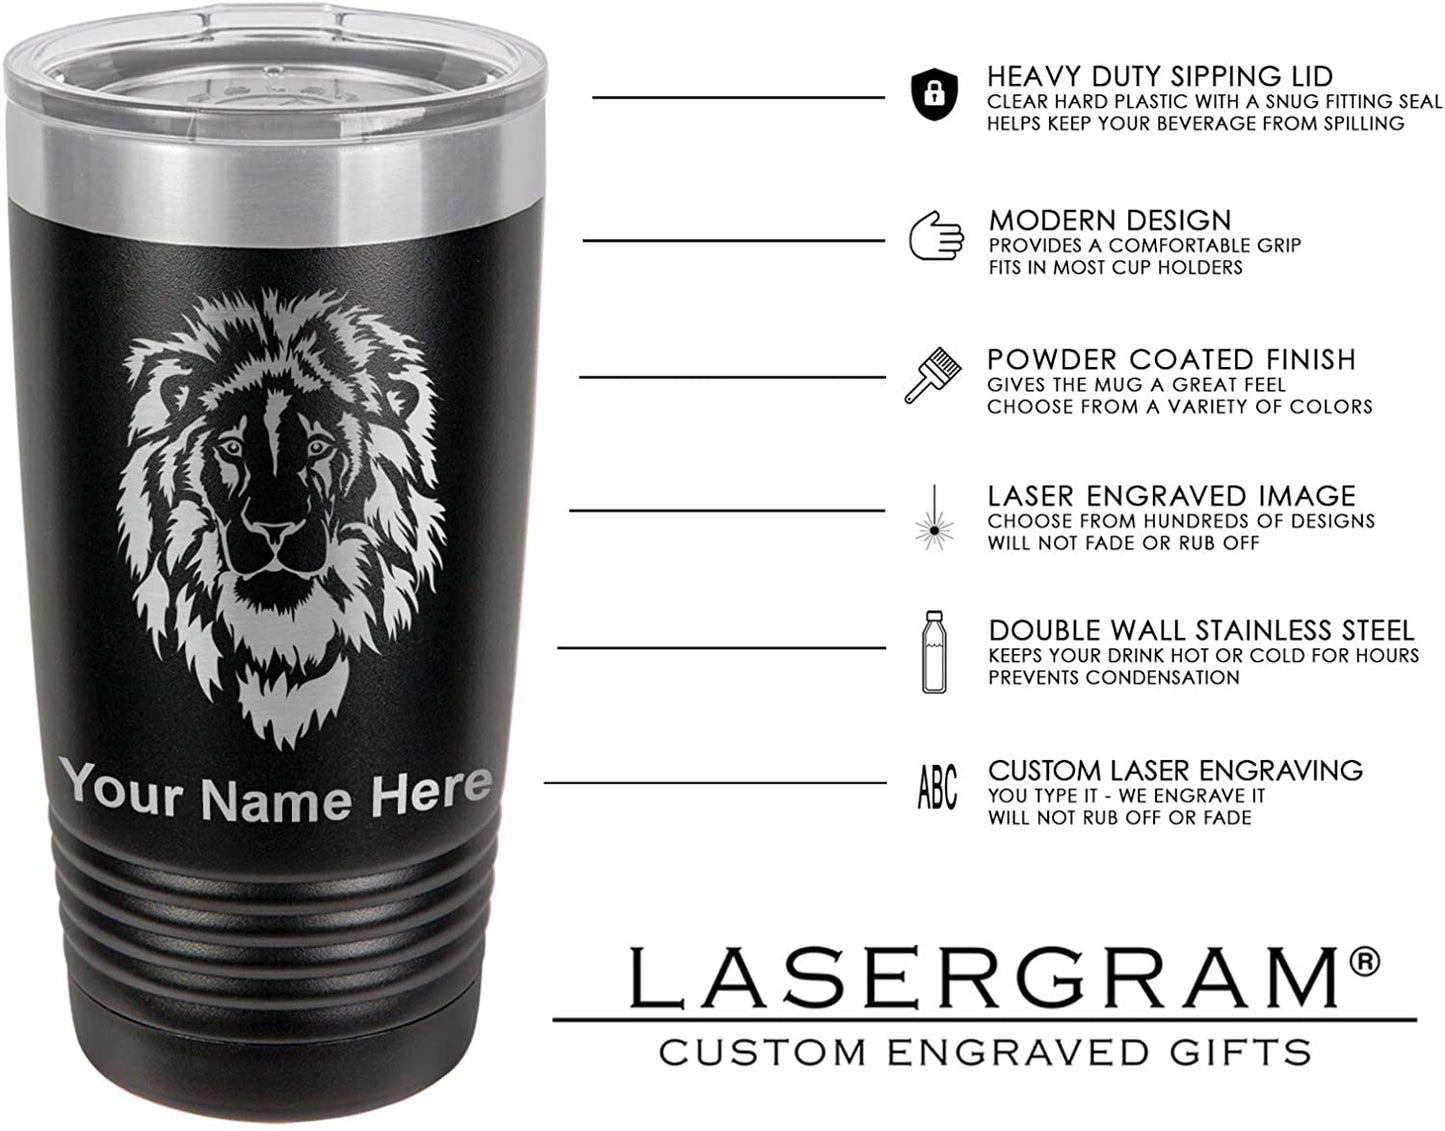 20oz Vacuum Insulated Tumbler Mug, Pair of Dice, Personalized Engraving Included